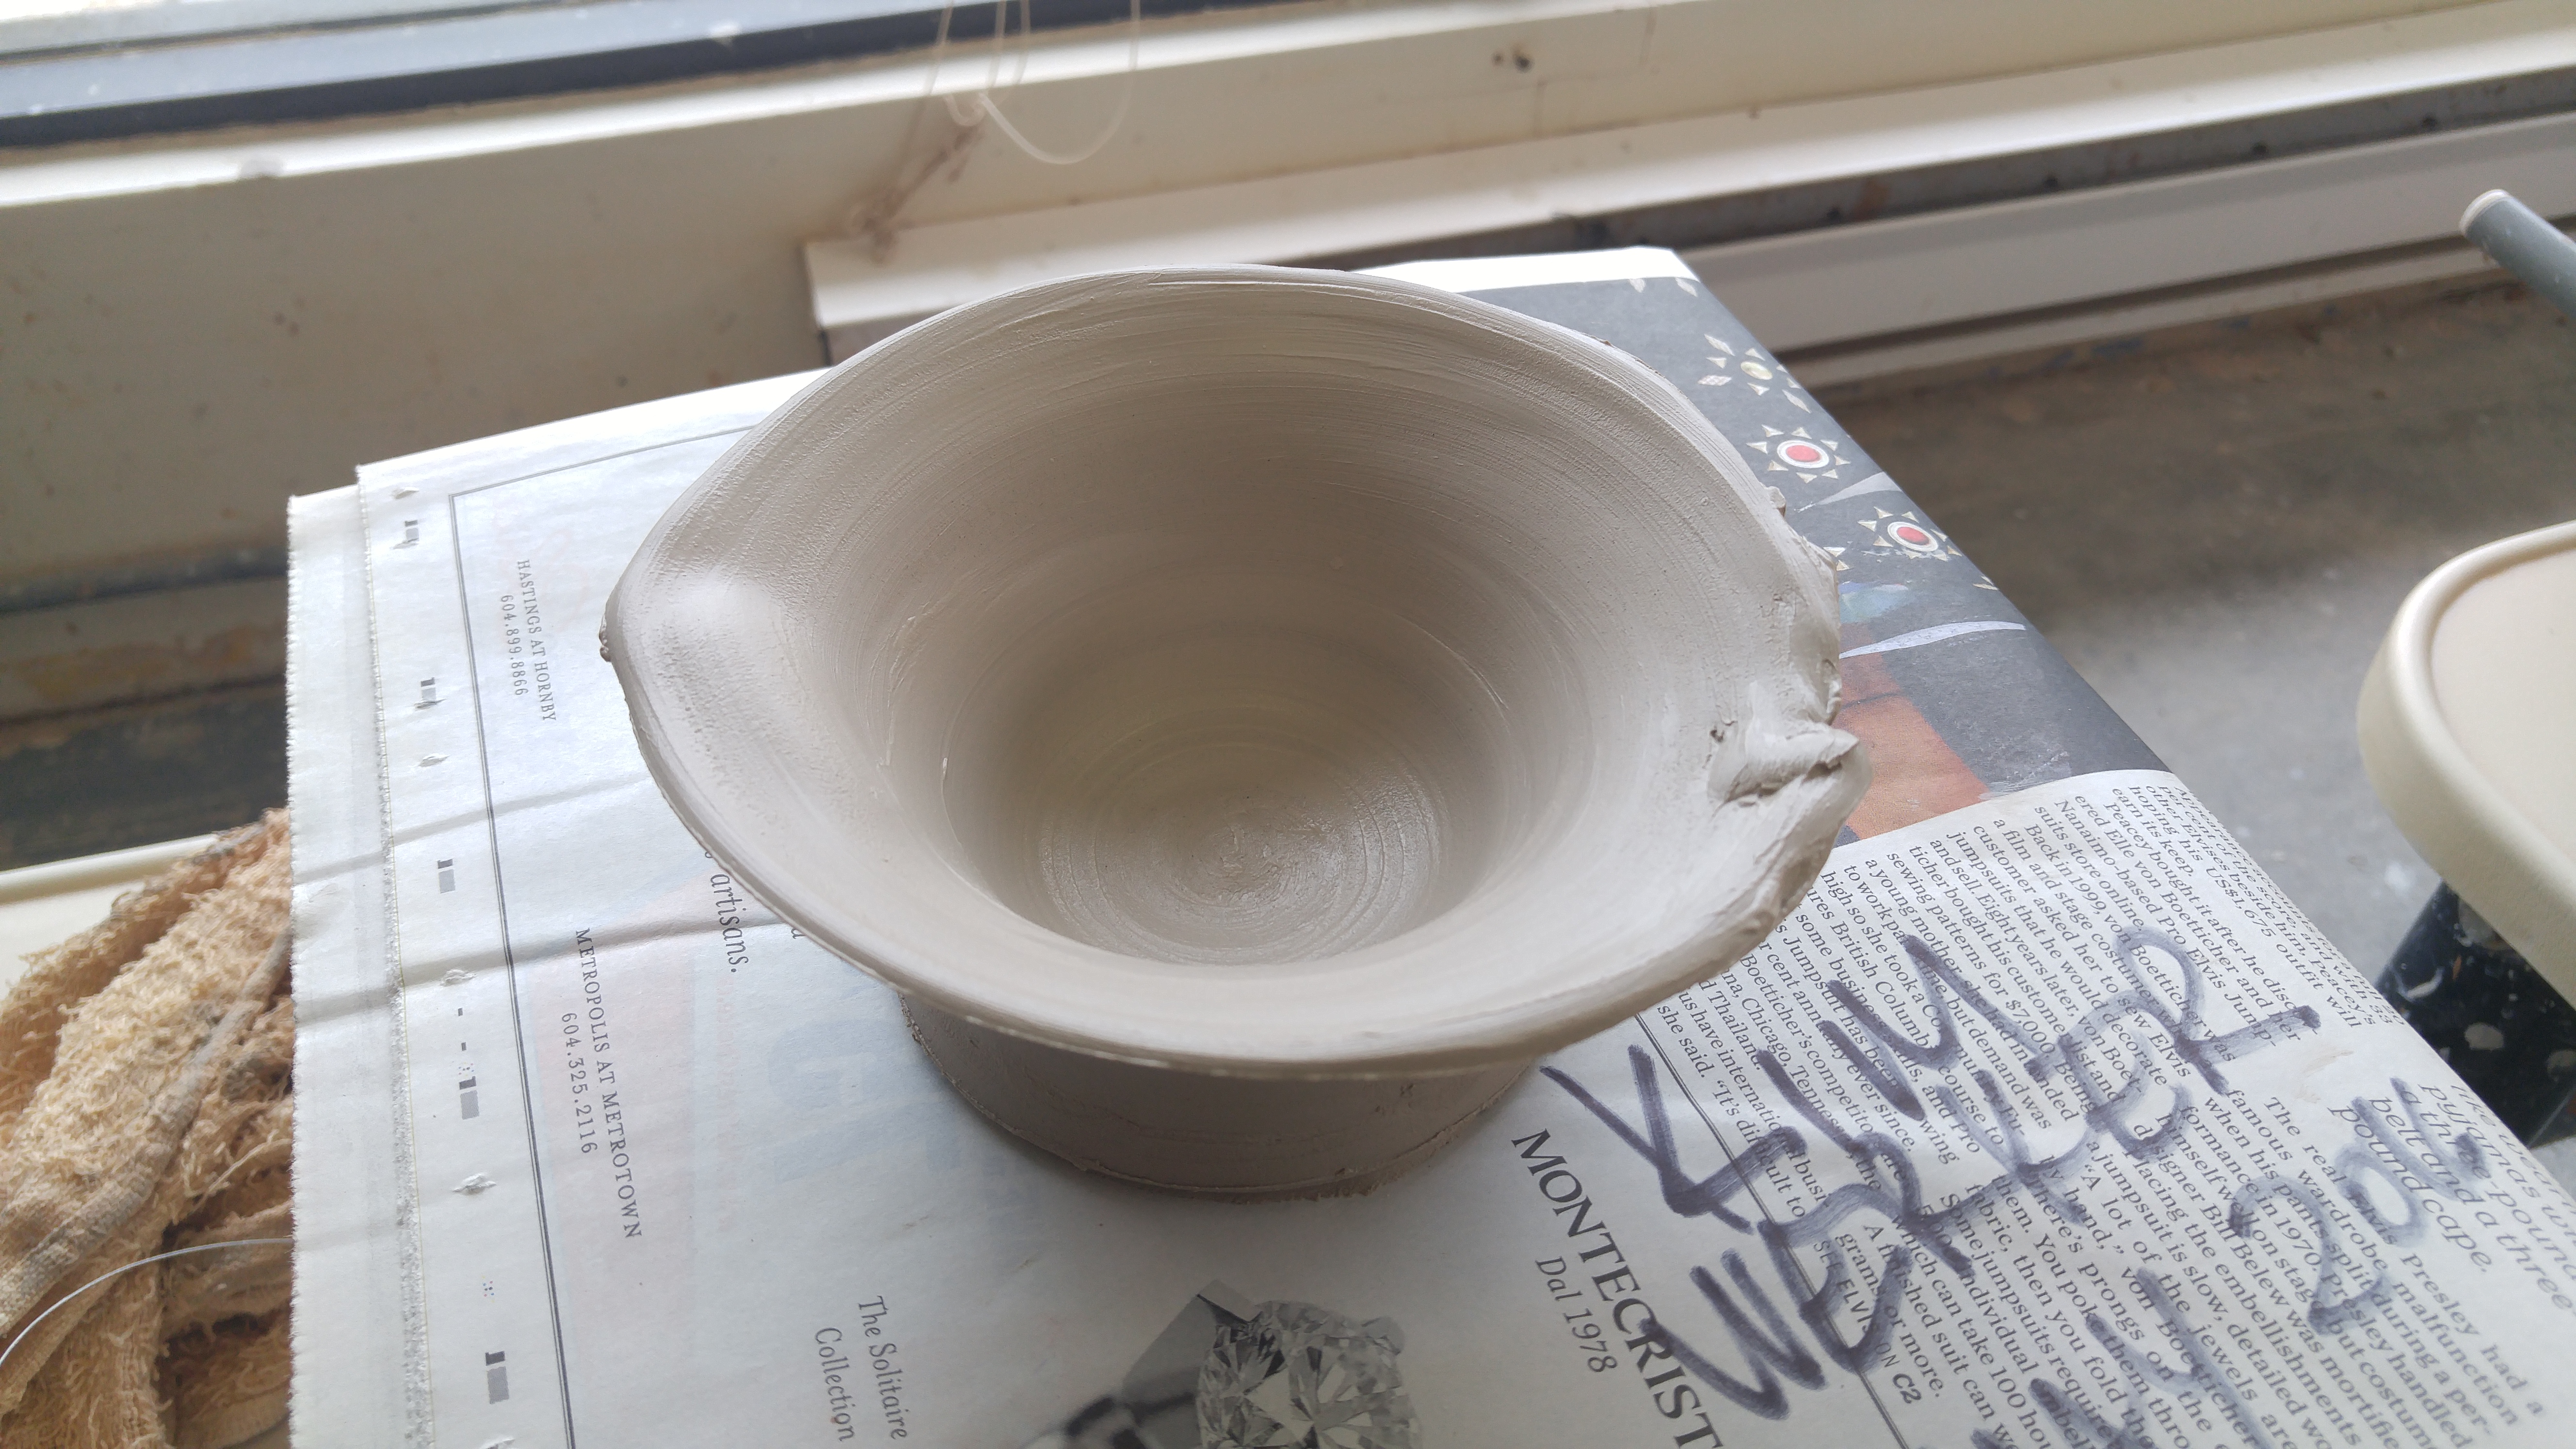 What I'm Learning: Pottery